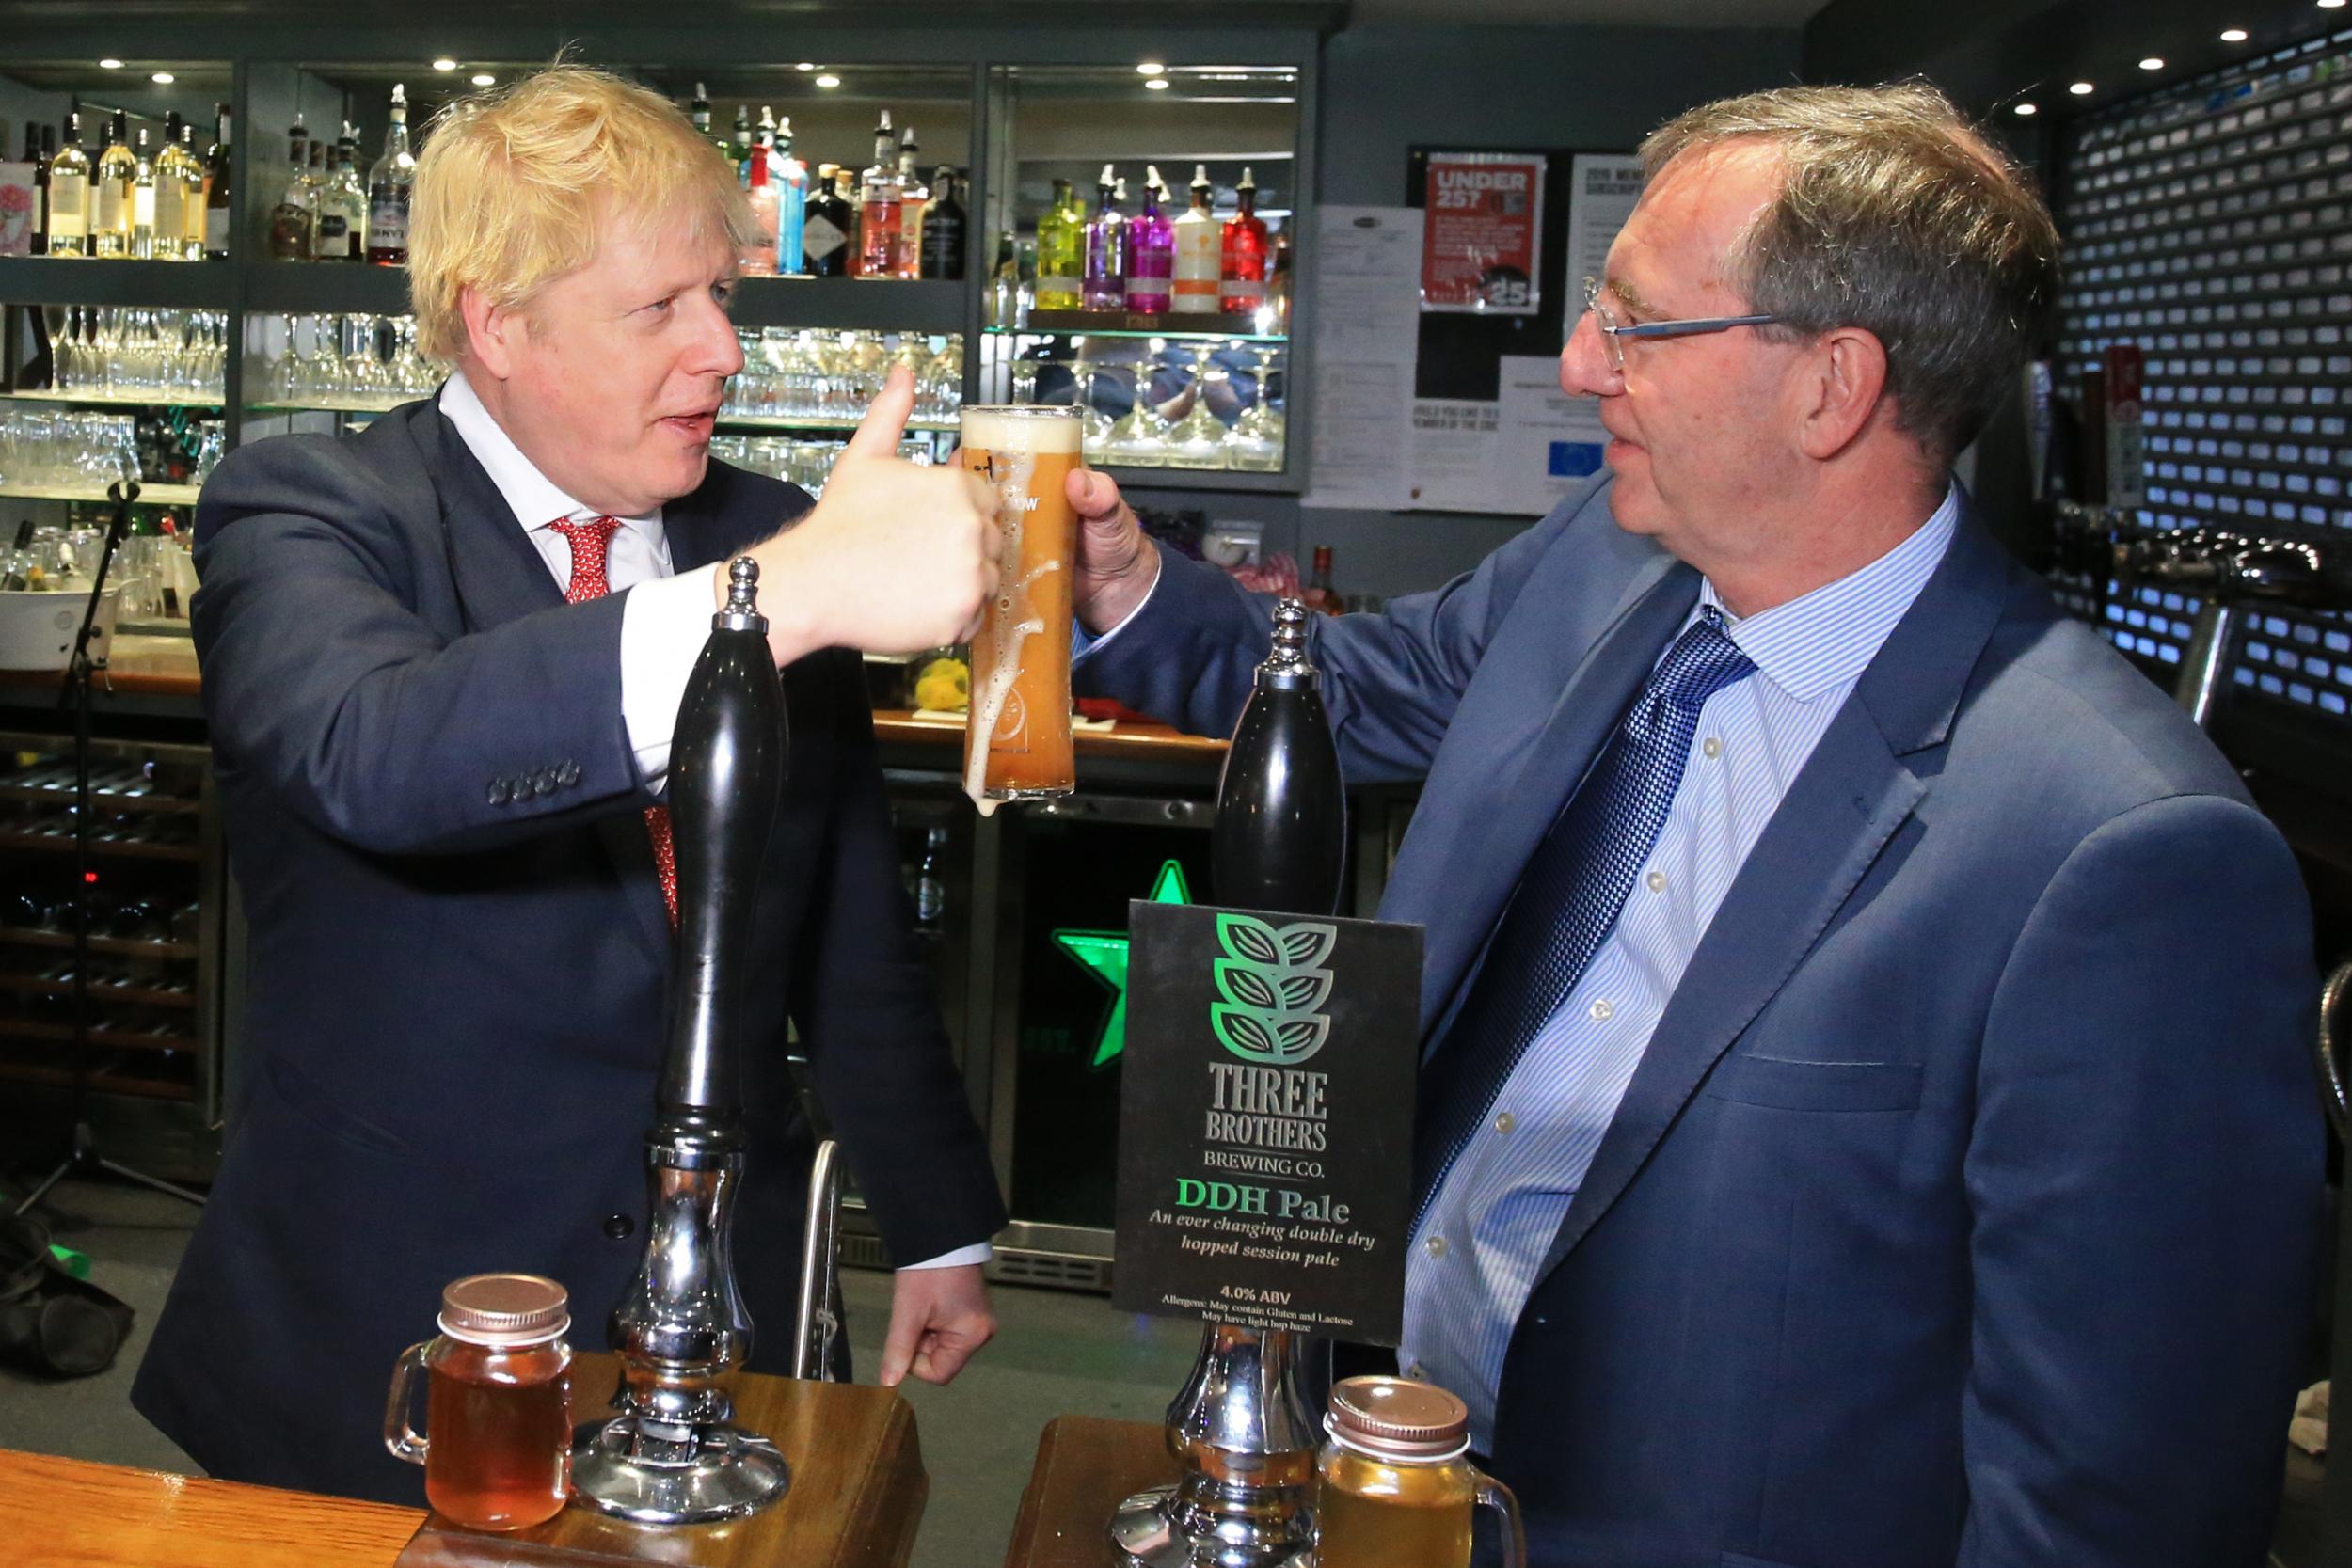 Boris Johnson toasts the newly elected MP for Sedgefield, Paul Howell, after the Conservatives’ election victory in December 2019